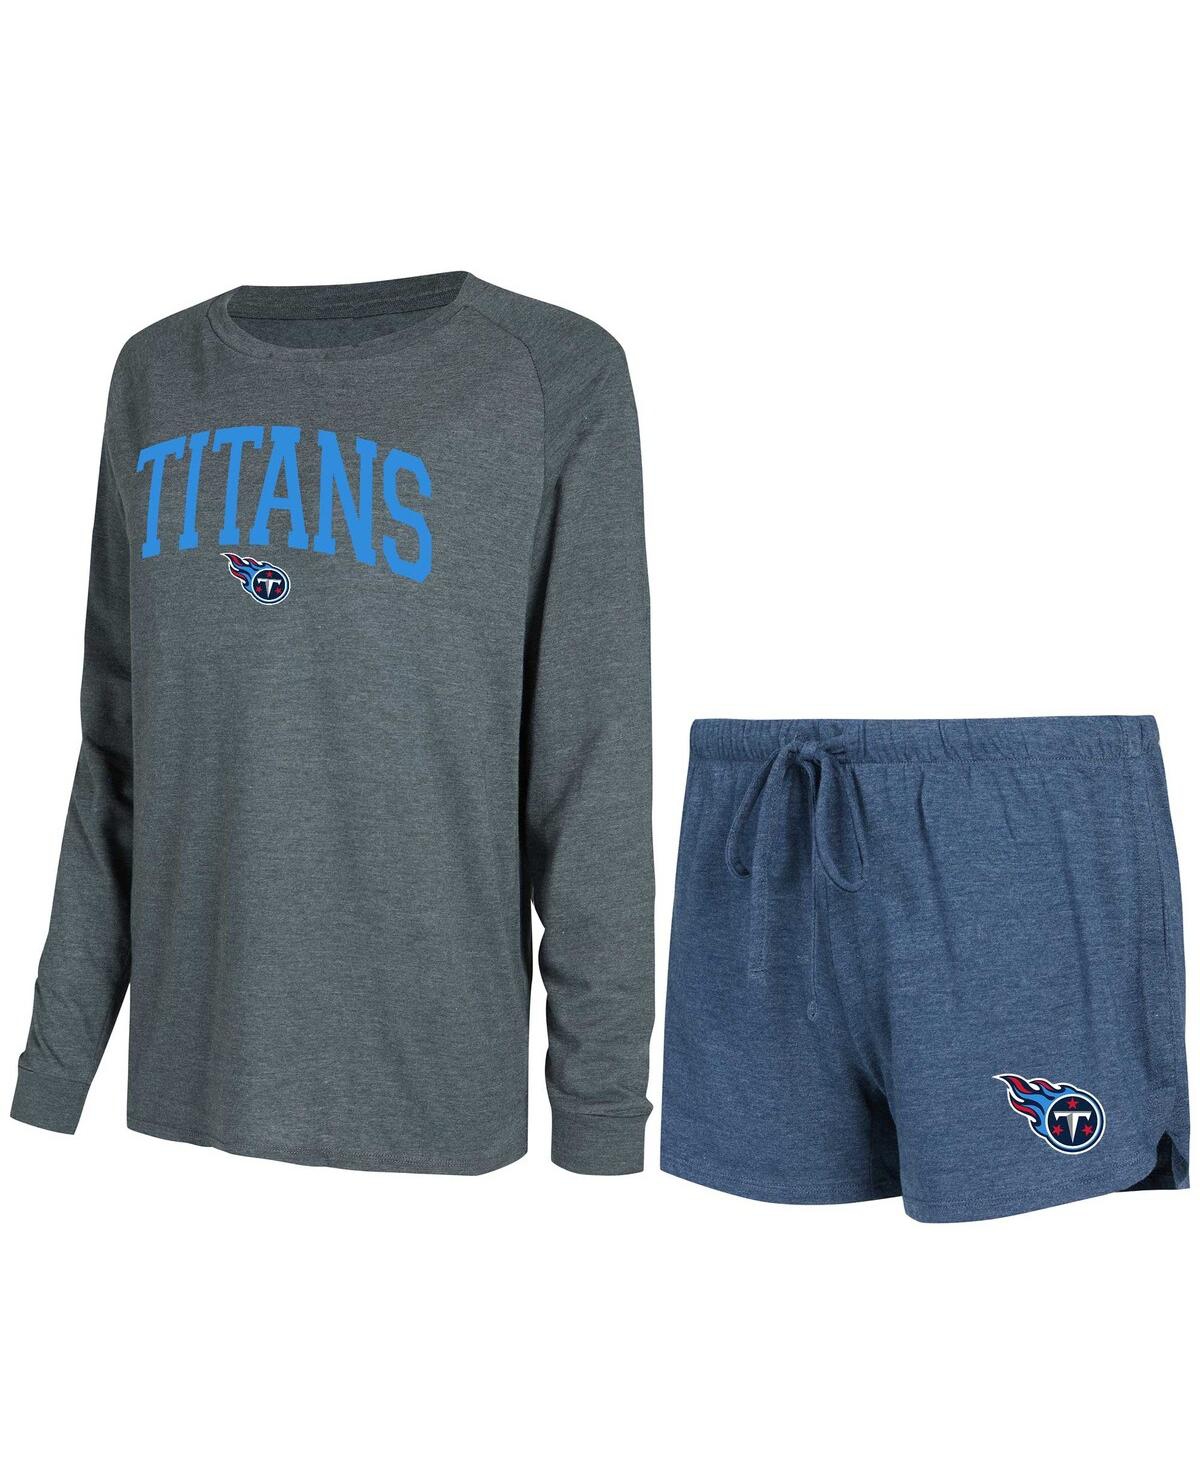 Women's Concepts Sport Navy, Charcoal Tennessee Titans Raglan Long Sleeve T-shirt and Shorts Lounge Set - Navy, Charcoal